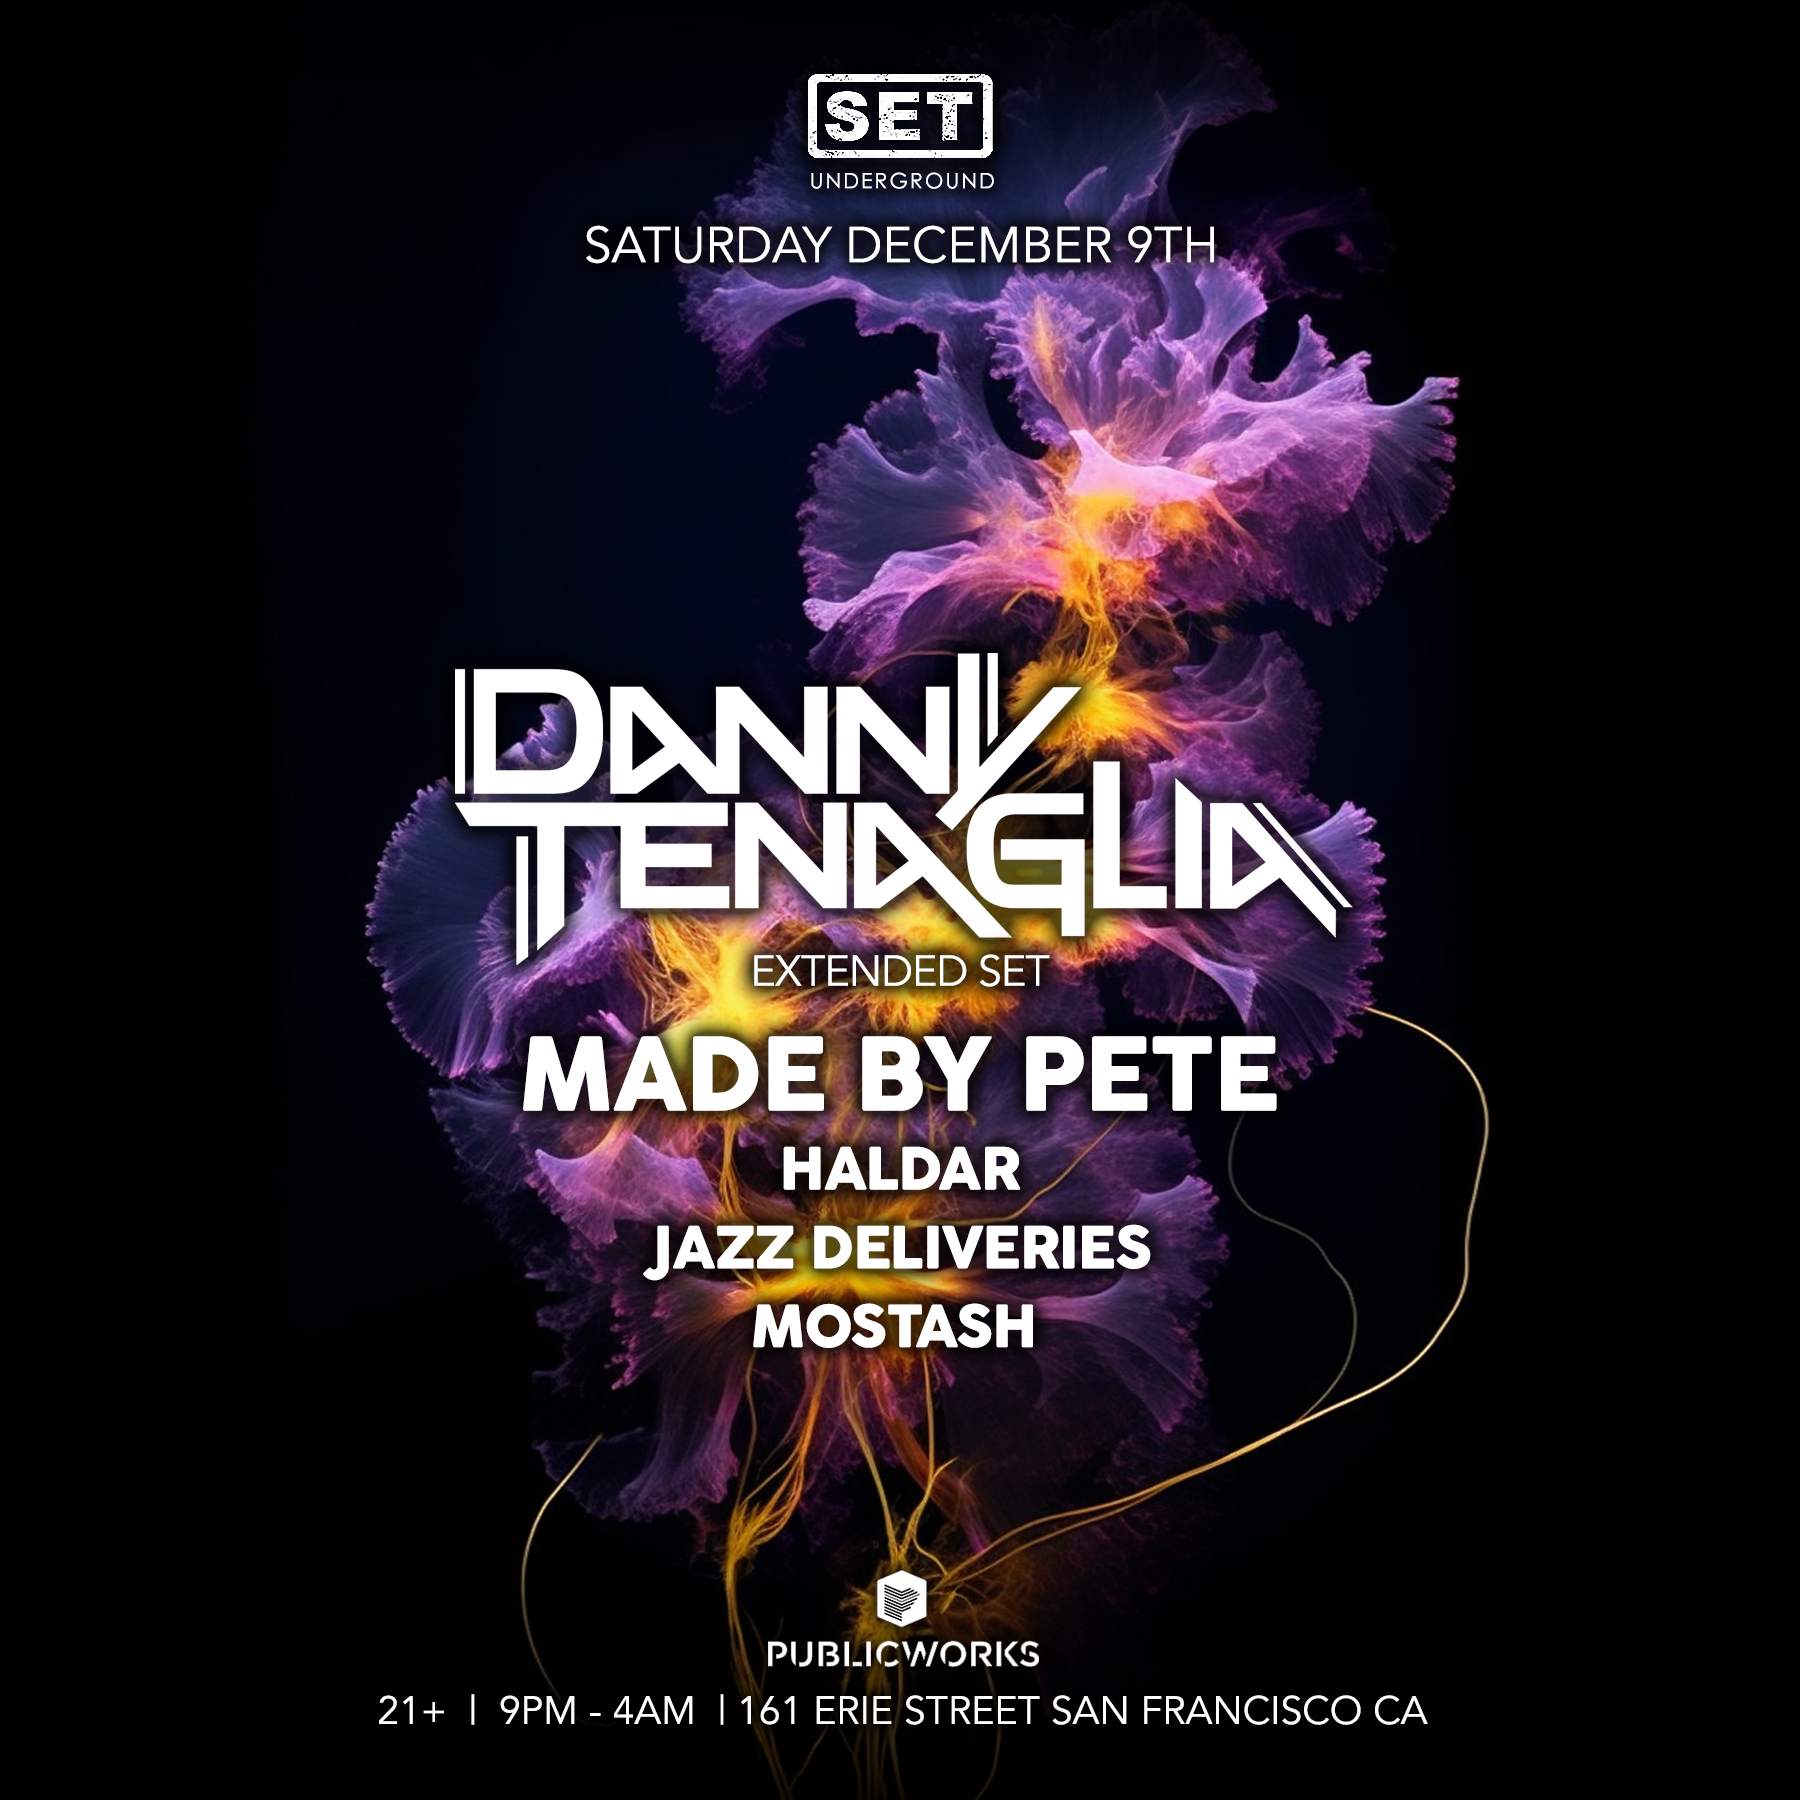 SET with Danny Tenaglia (Extended Set) and Made By Pete - Página frontal